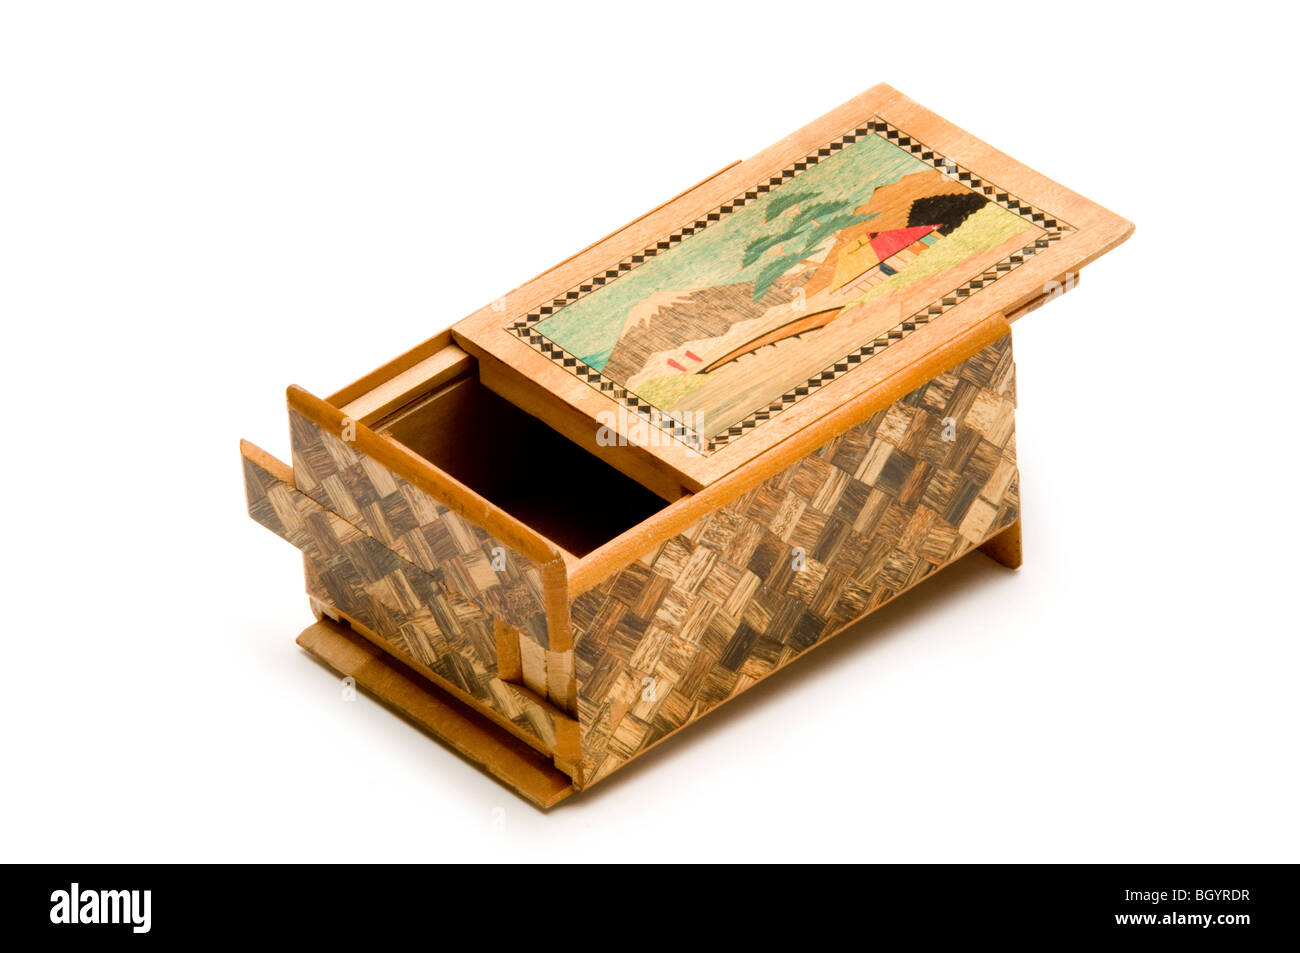 Chinese Wooden Puzzle Box Stock Photo, Royalty Free Image: 27655987 